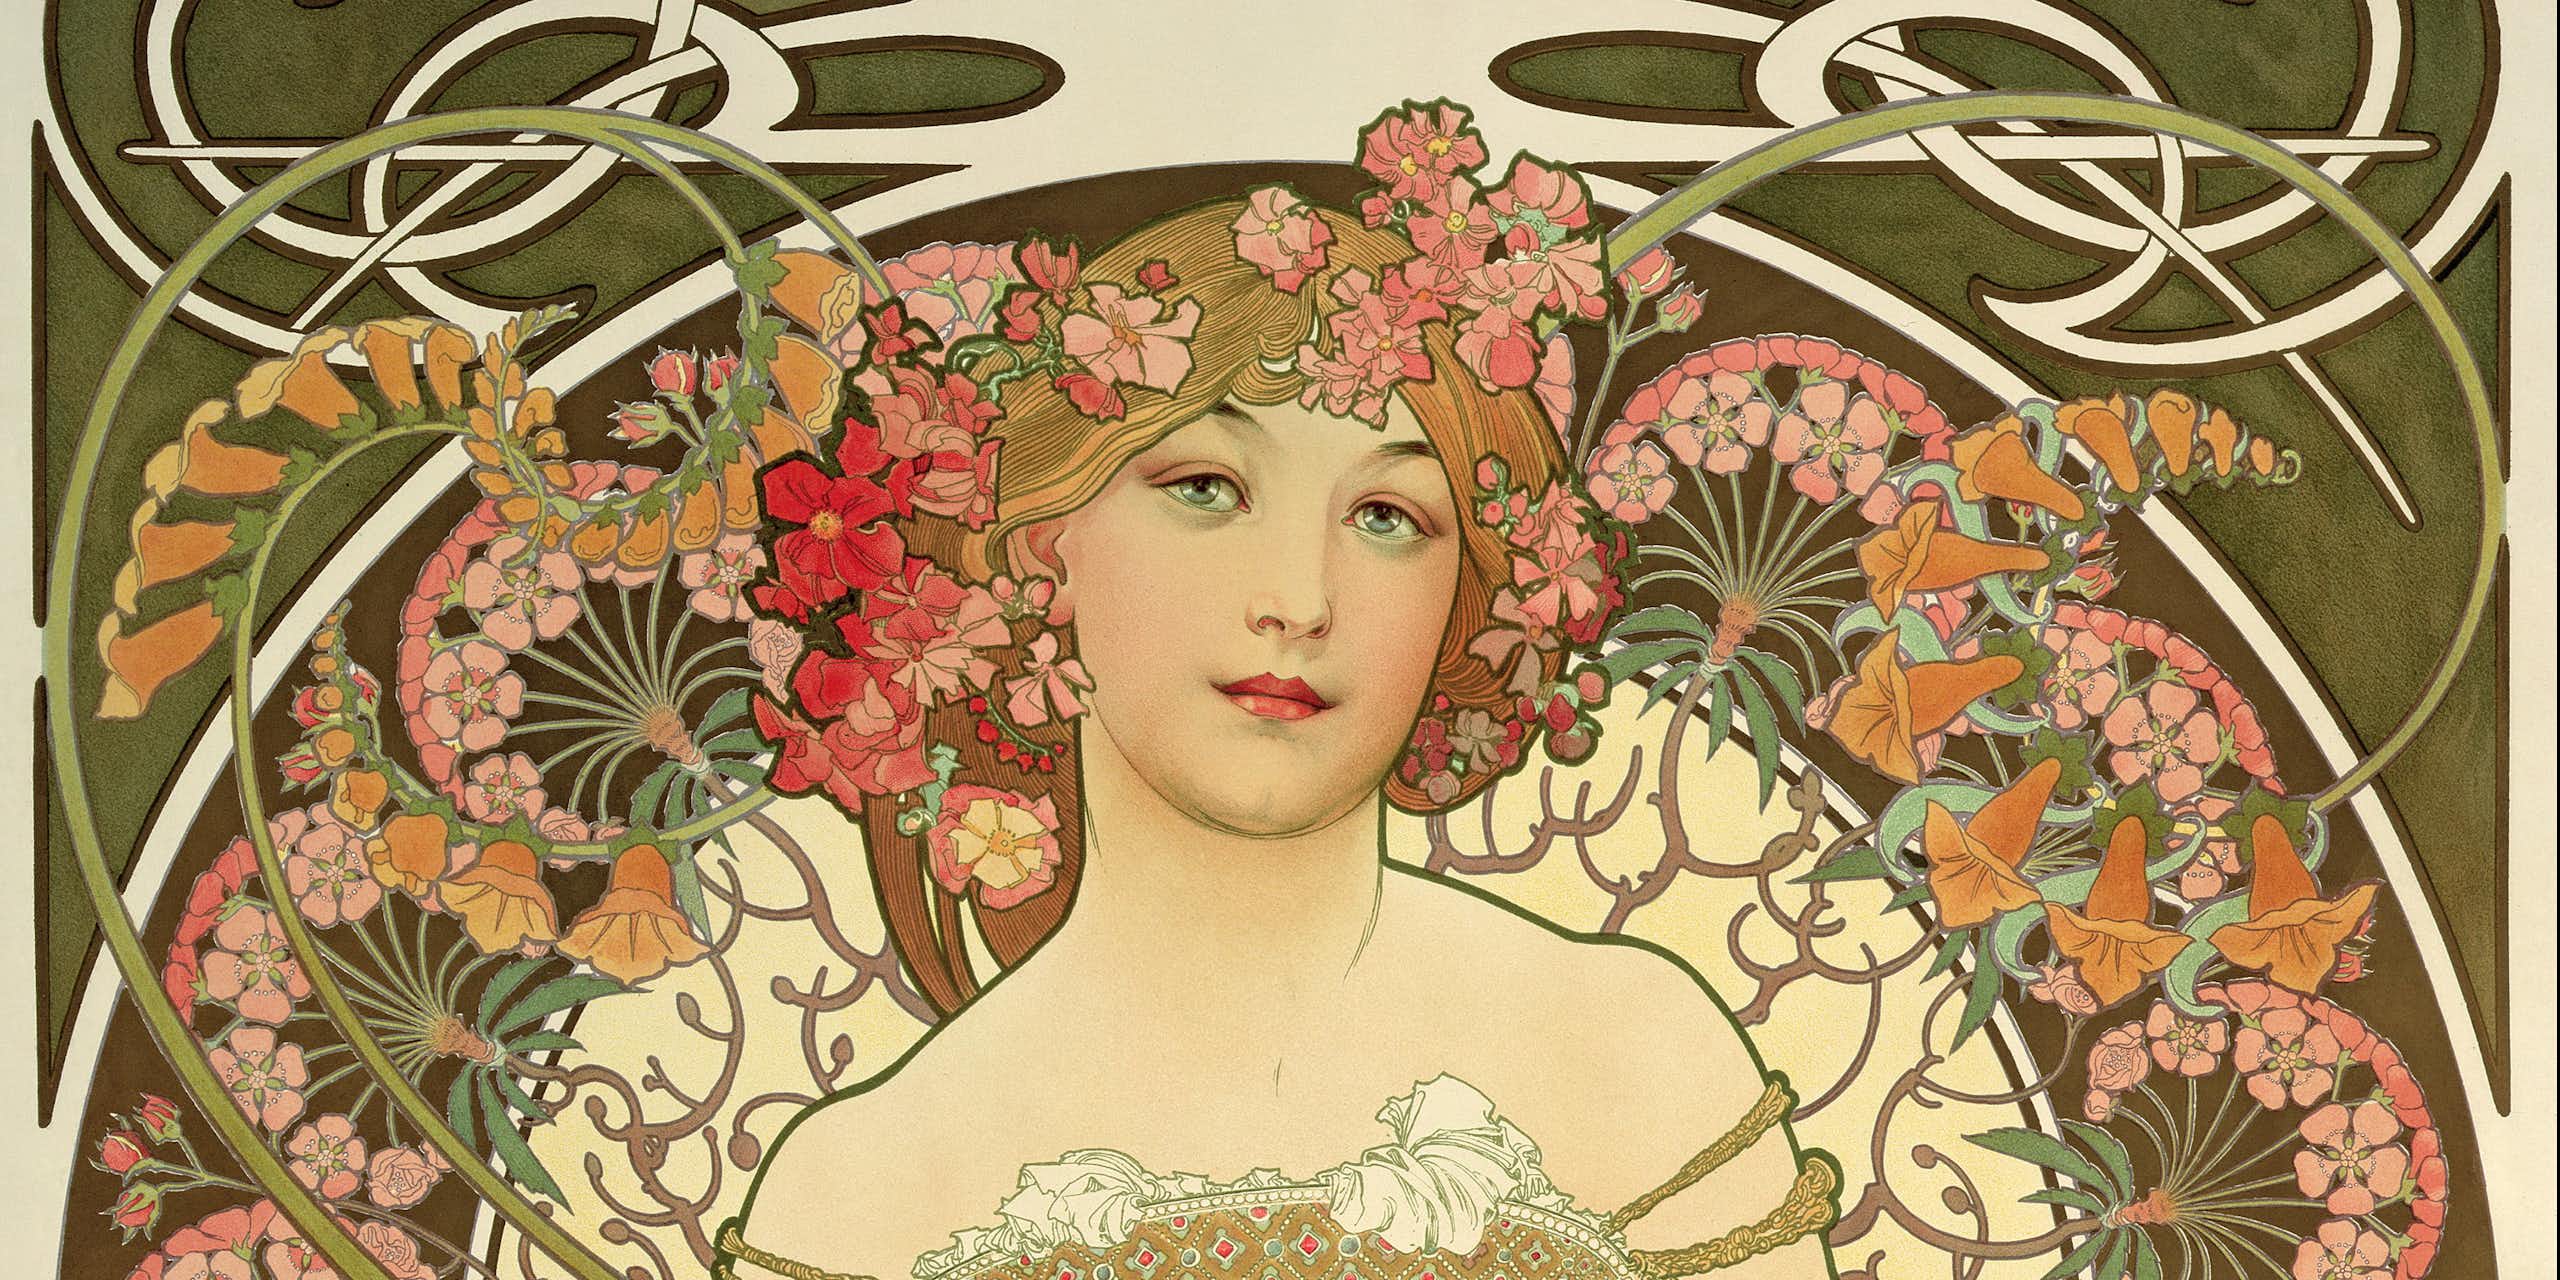 Alphonse Mucha and Art Nouveau: 100 years after its creation, his work is still a balm for a world in upheaval